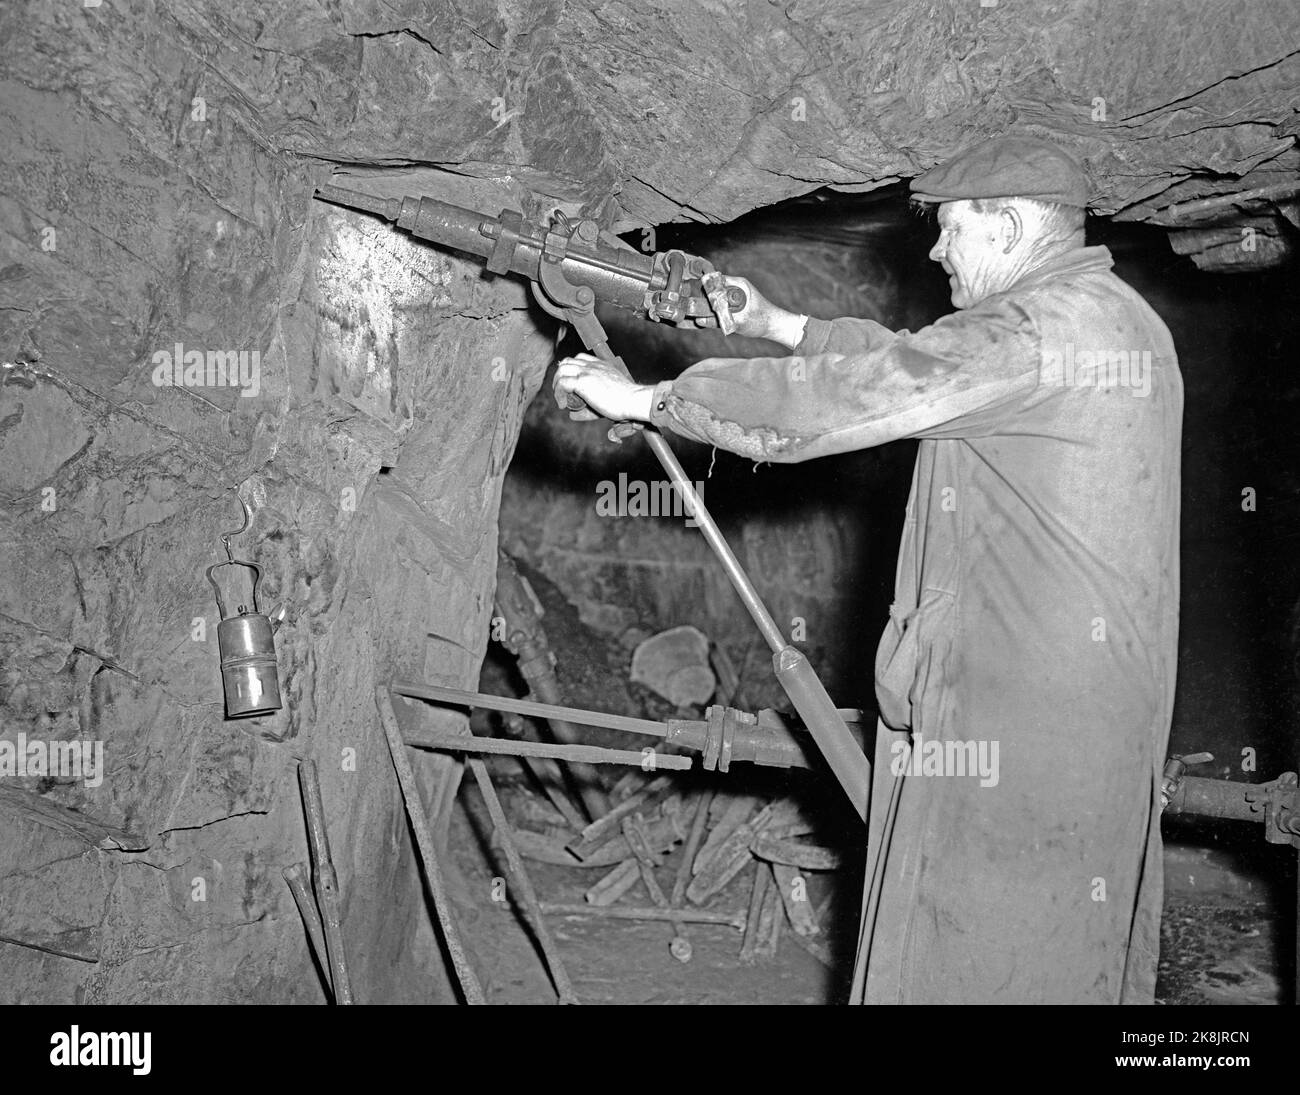 kongsberg 19550512 kongsberg slvverk photographed on may 12 1955 the mining company was established in 1623 and belongs to norways oldest and most well known mining the work is also considered norways largest company in pre industrial times and reached an extent of about 1000 km of mines 300 shafts and between 1500 and 2000 sharp kongsberg slvverk was in continuous operation until 1958 source wiki the picture miner drills in the mountains photo sv ntb 2K8JRCN